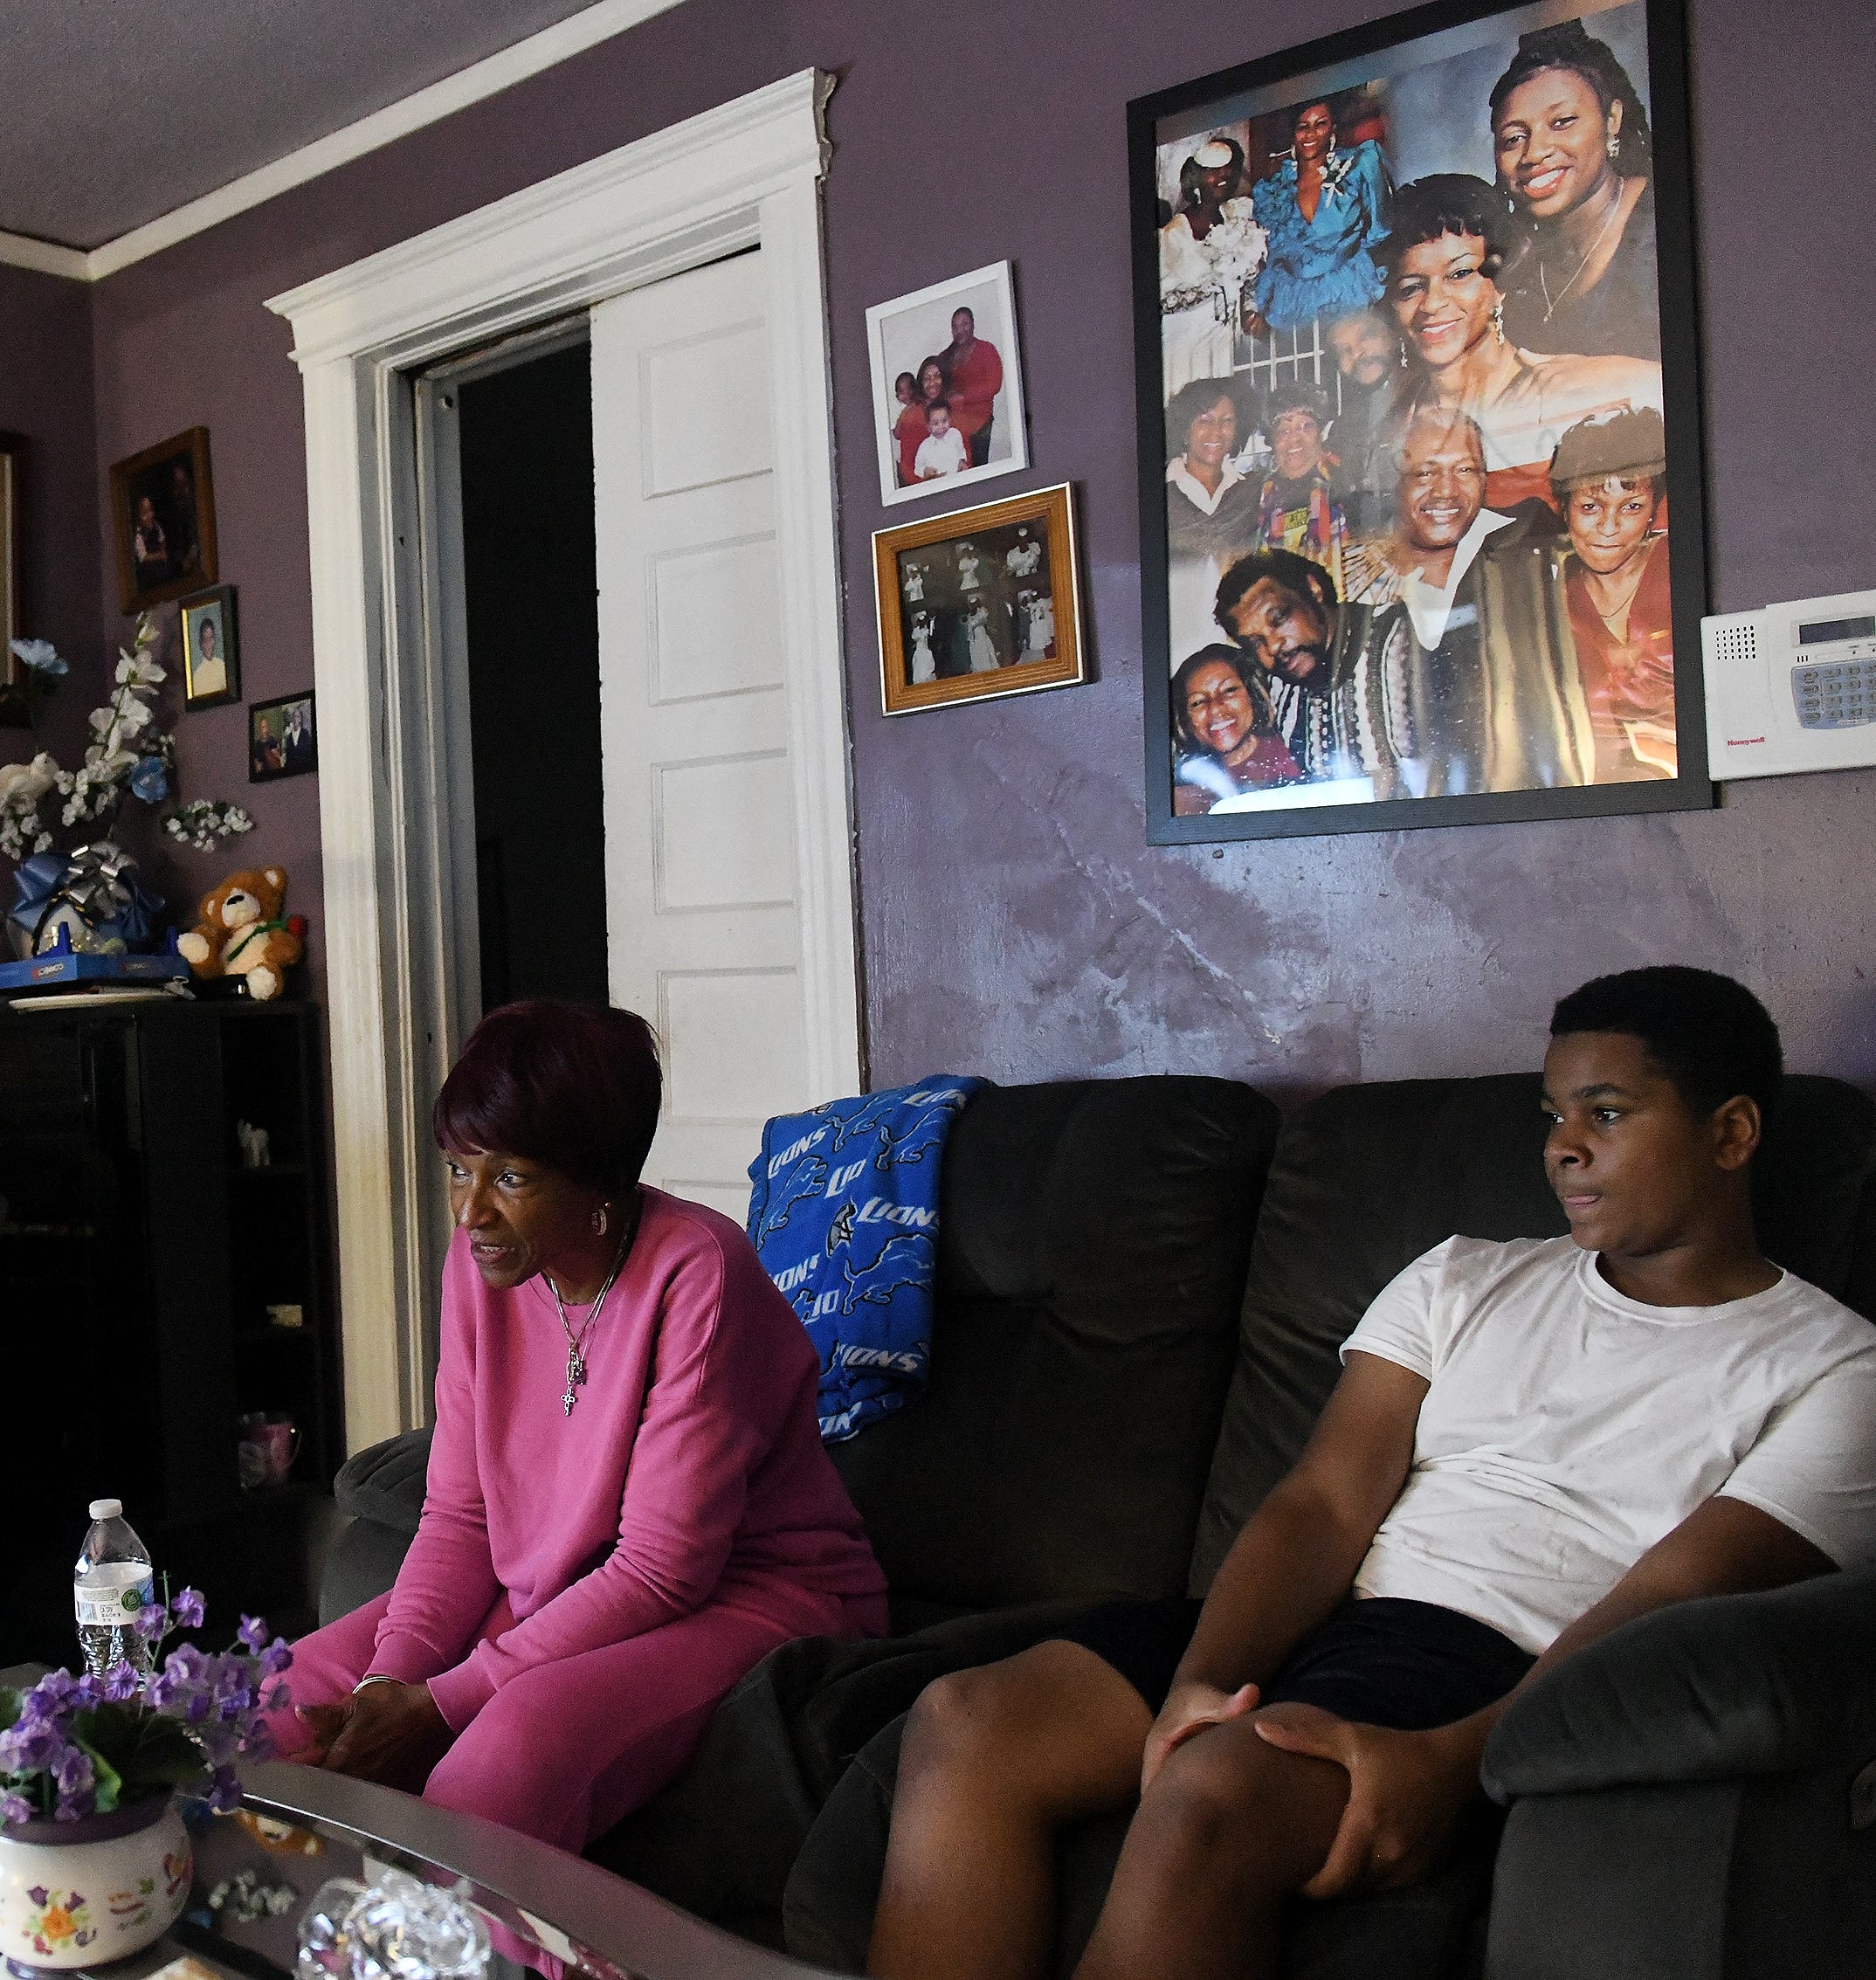 Navelle Jenkins, 78, of Detroit with her grandson, Shane, 15, at their home in Detroit. Jenkins is raising Shane after the death of his mother, Jenkins' daughter.